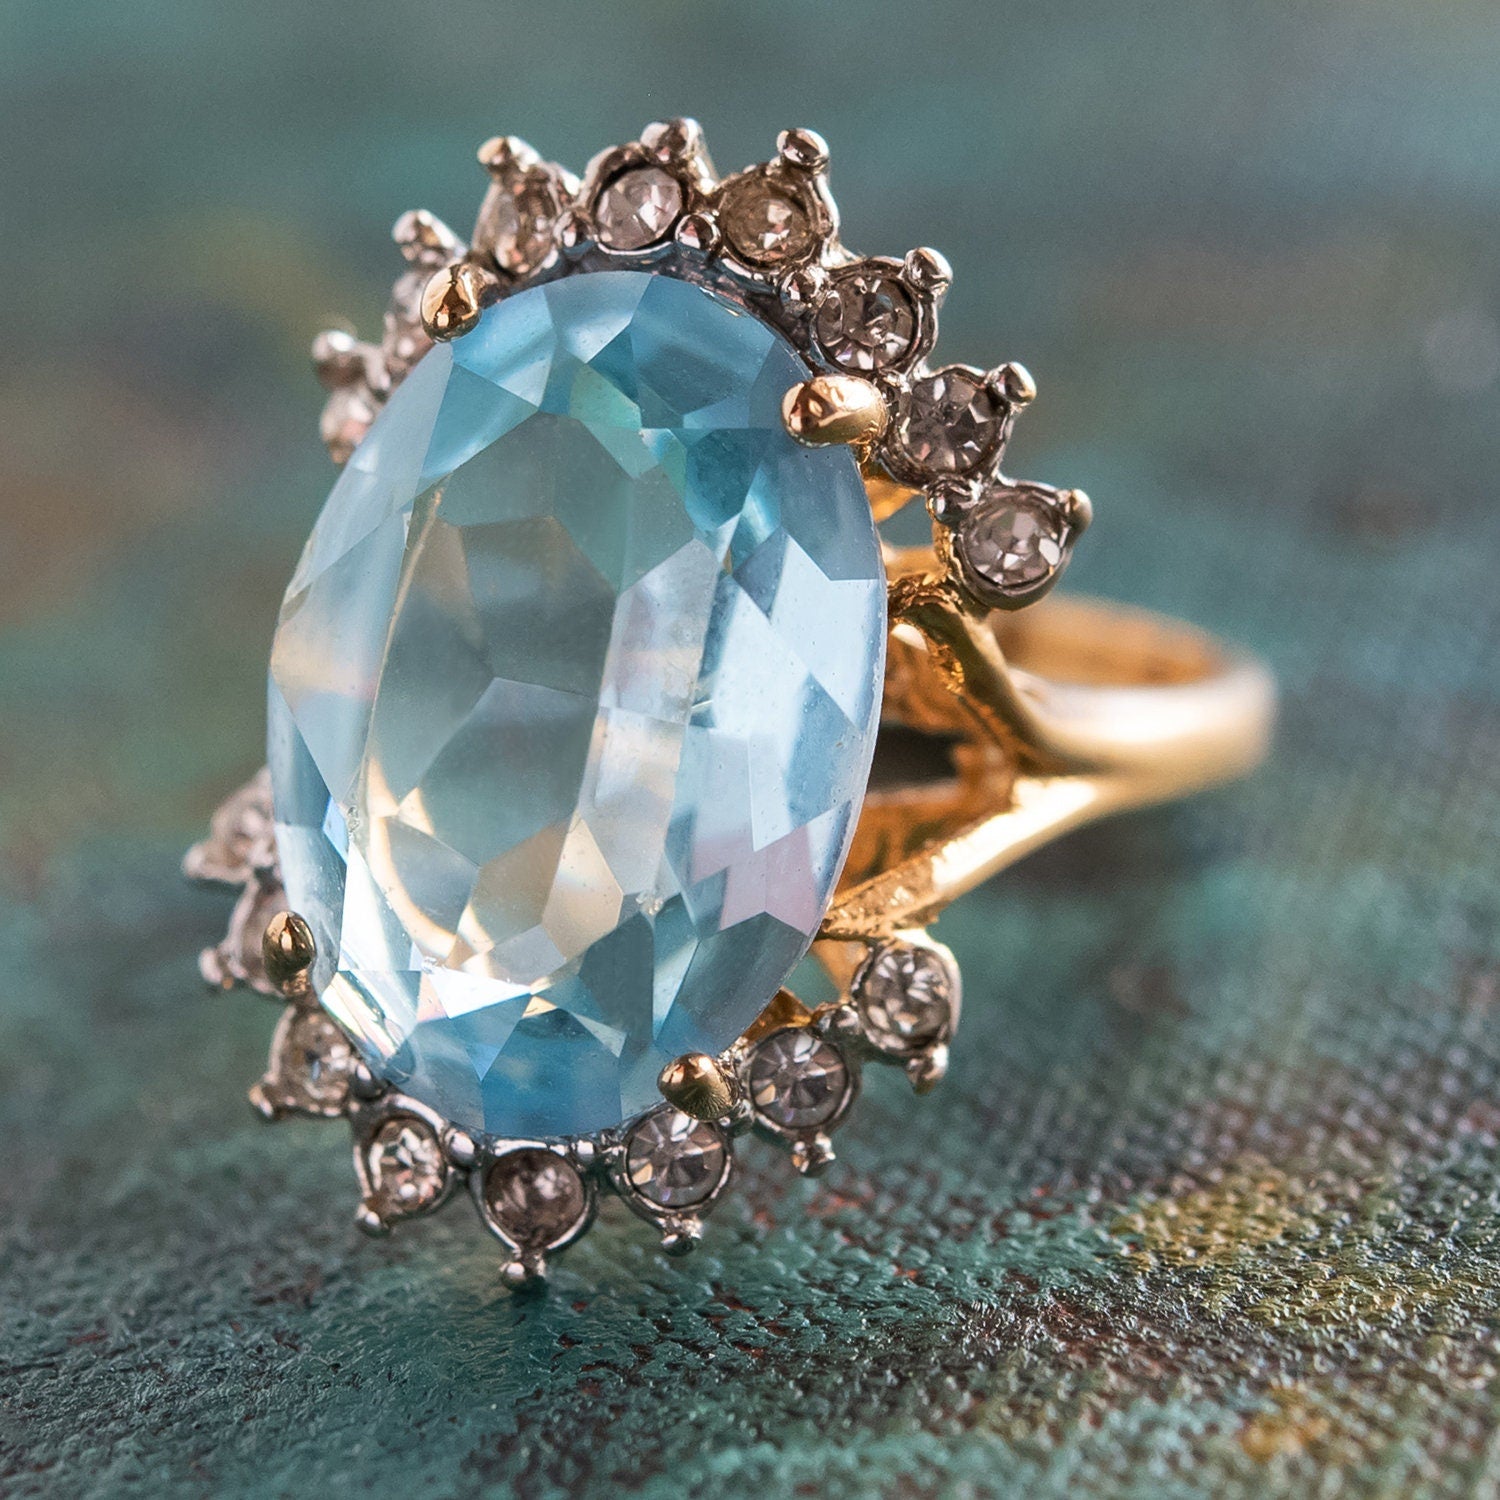 Vintage Ring Aquamarine and Clear Swarovski Crystal Ring 18k Gold Antique Jewelry for Women R1909-AQY - Limited Stock - Never Worn